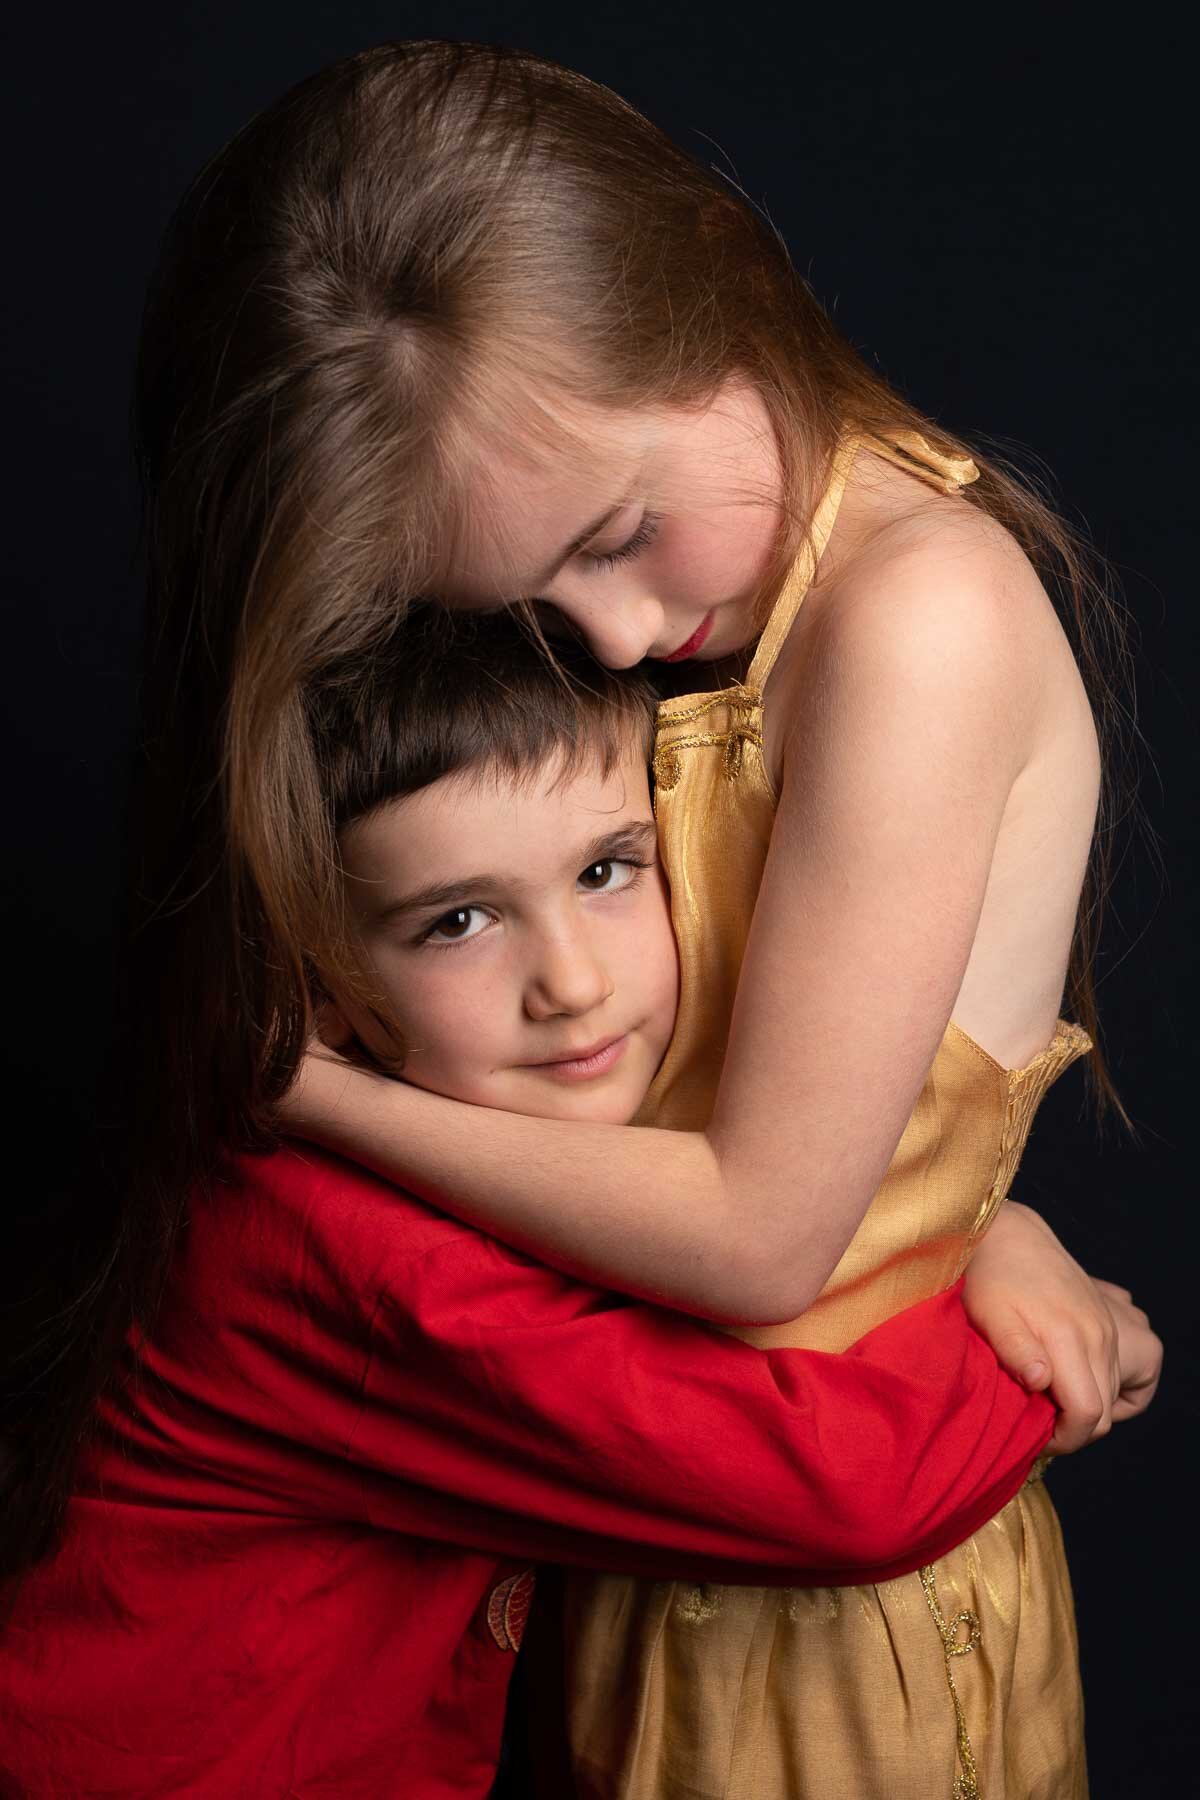  This brother and sister came to the studio with their mother. We made a series of individual portraits of each of them, and at the end they spontaneously hugged. Luckily, I was quick enough to capture the moment. 